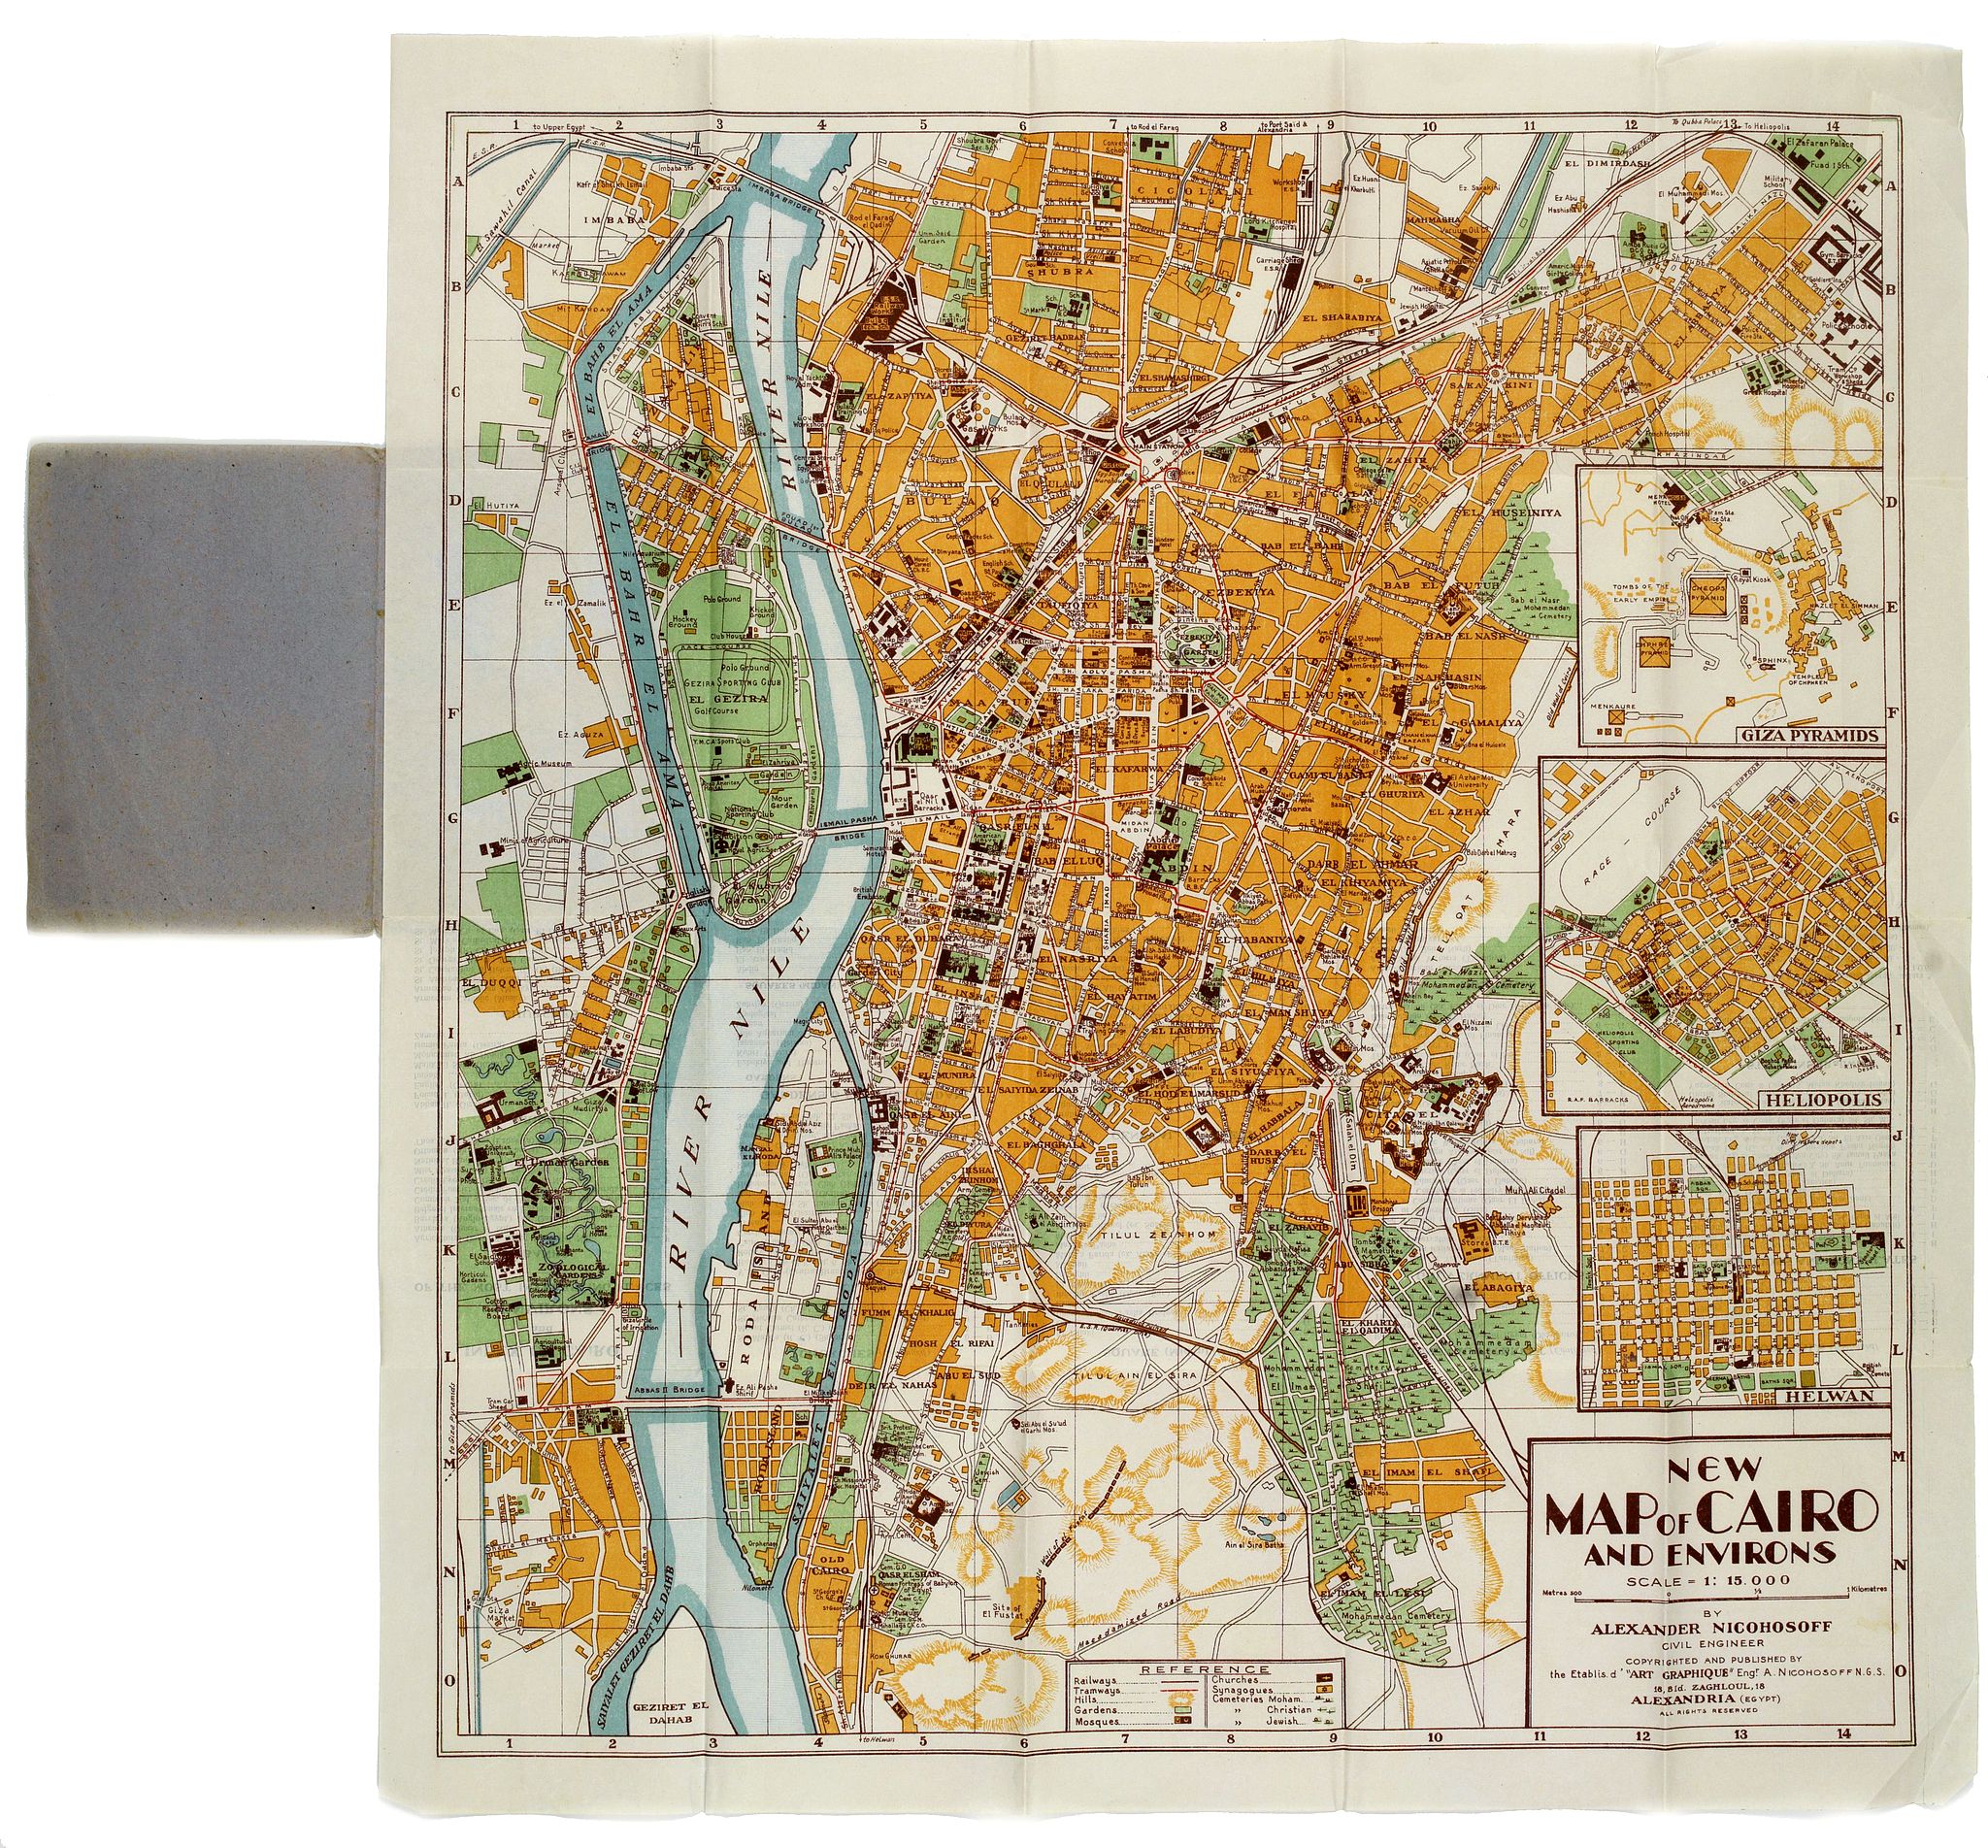 New Map of Cairo and Environs.